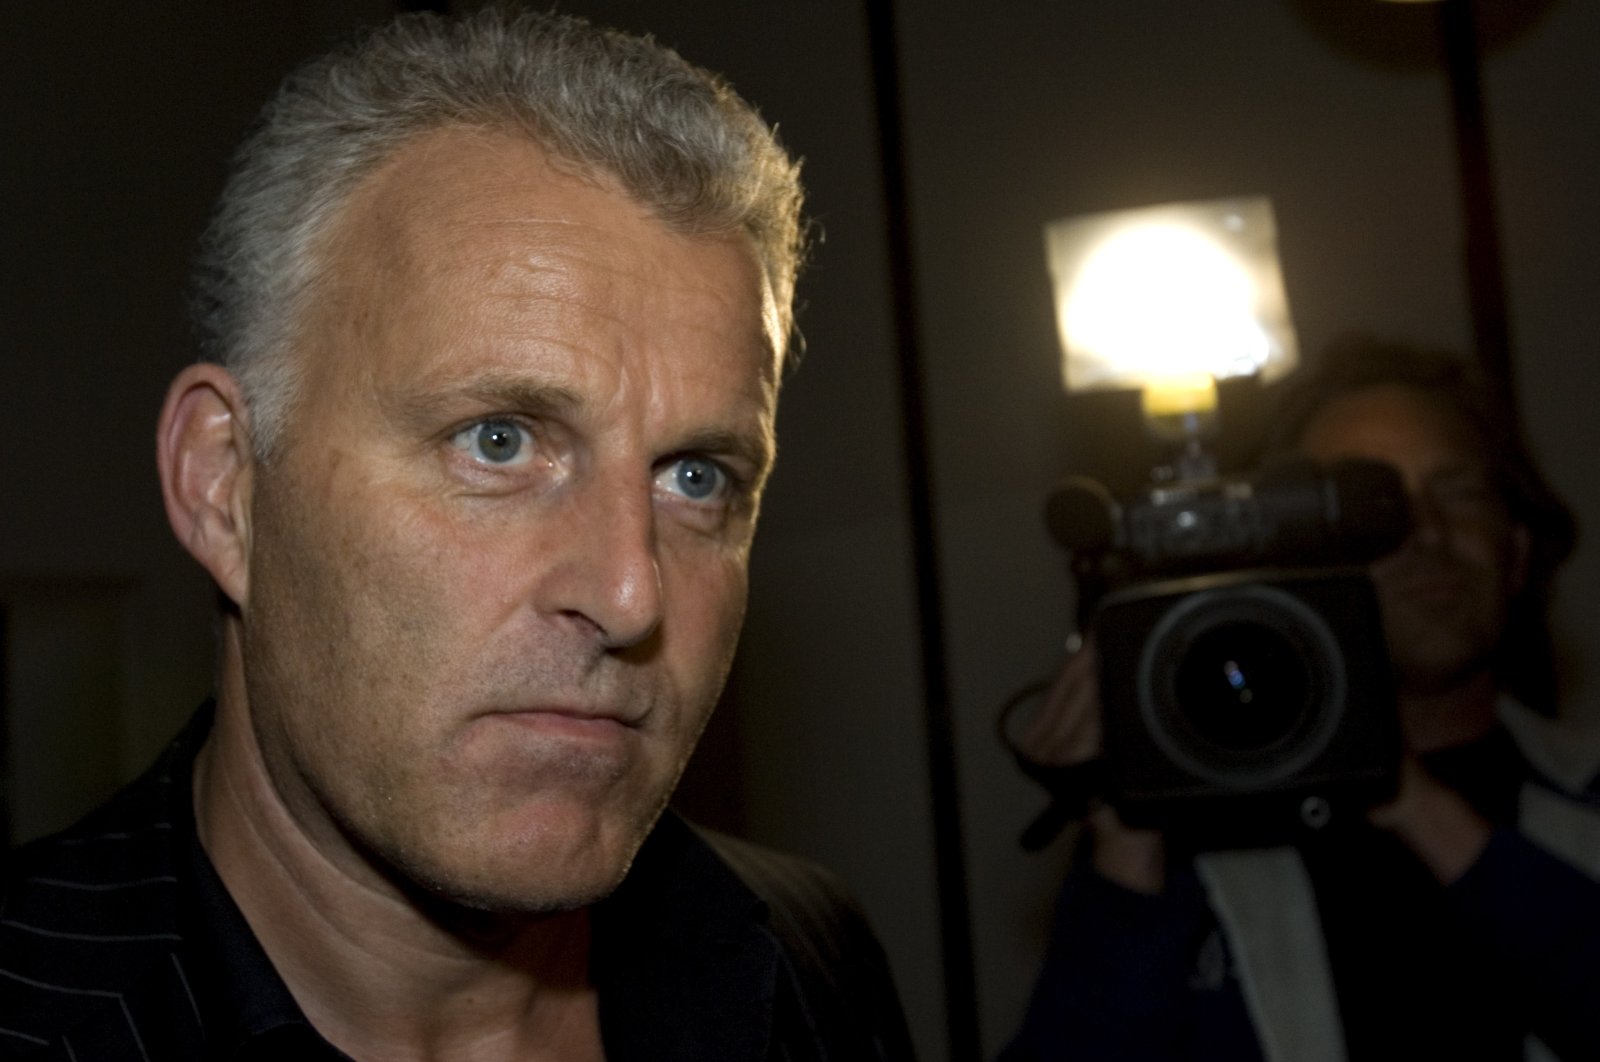 Dutch crime reporter Peter R. de Vries, prior to attending a live TV show in Amsterdam, Netherlands, Jan. 31, 2008. (AP Photo)